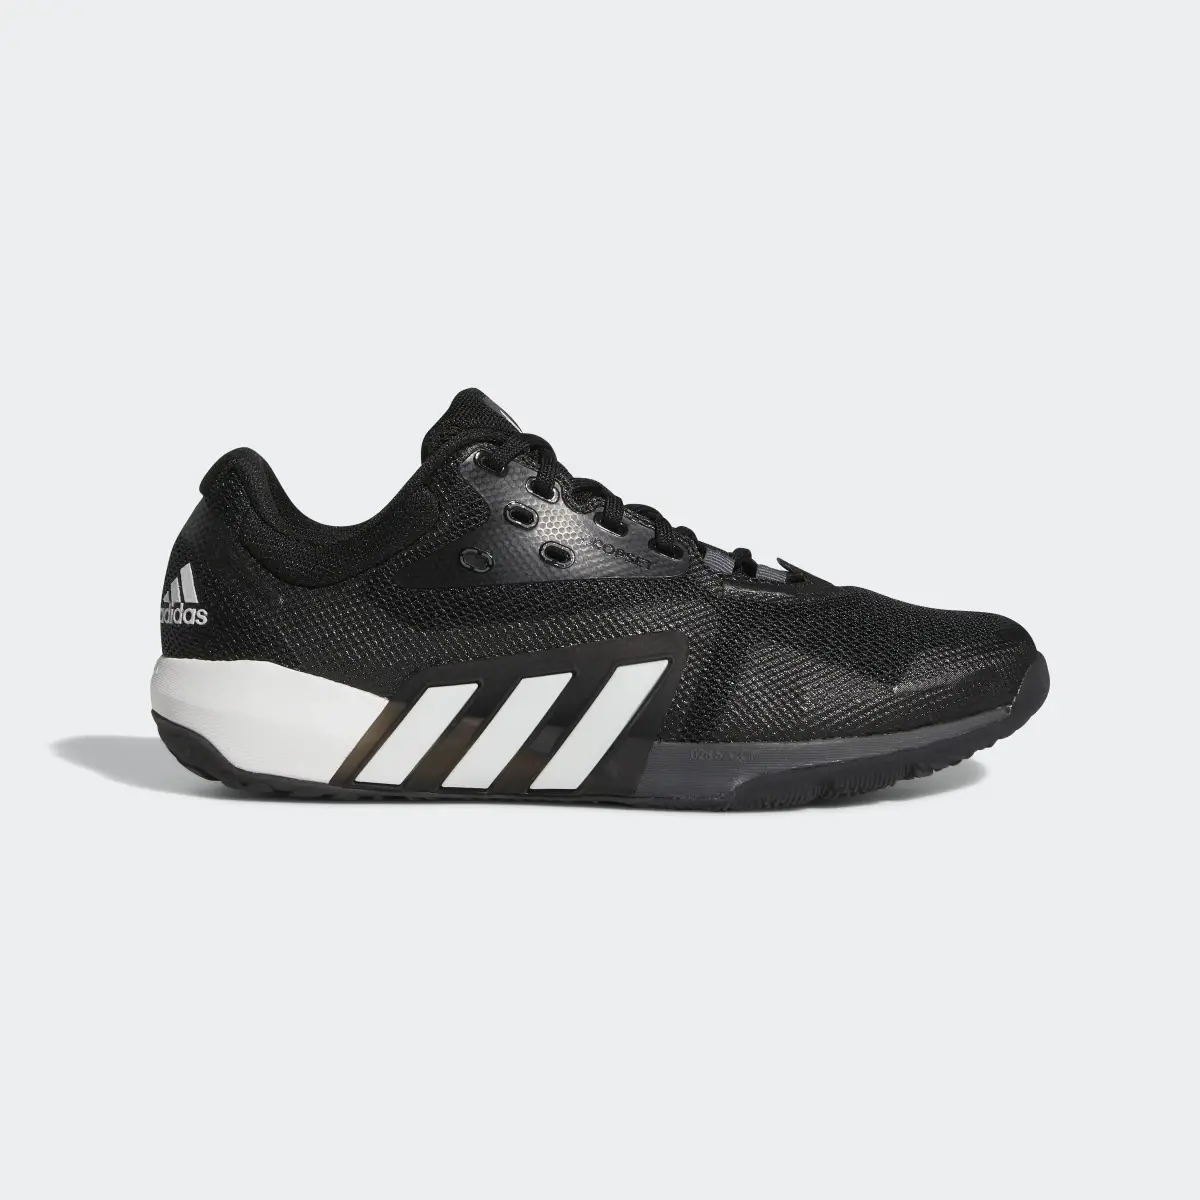 Adidas Dropset Trainers. 2